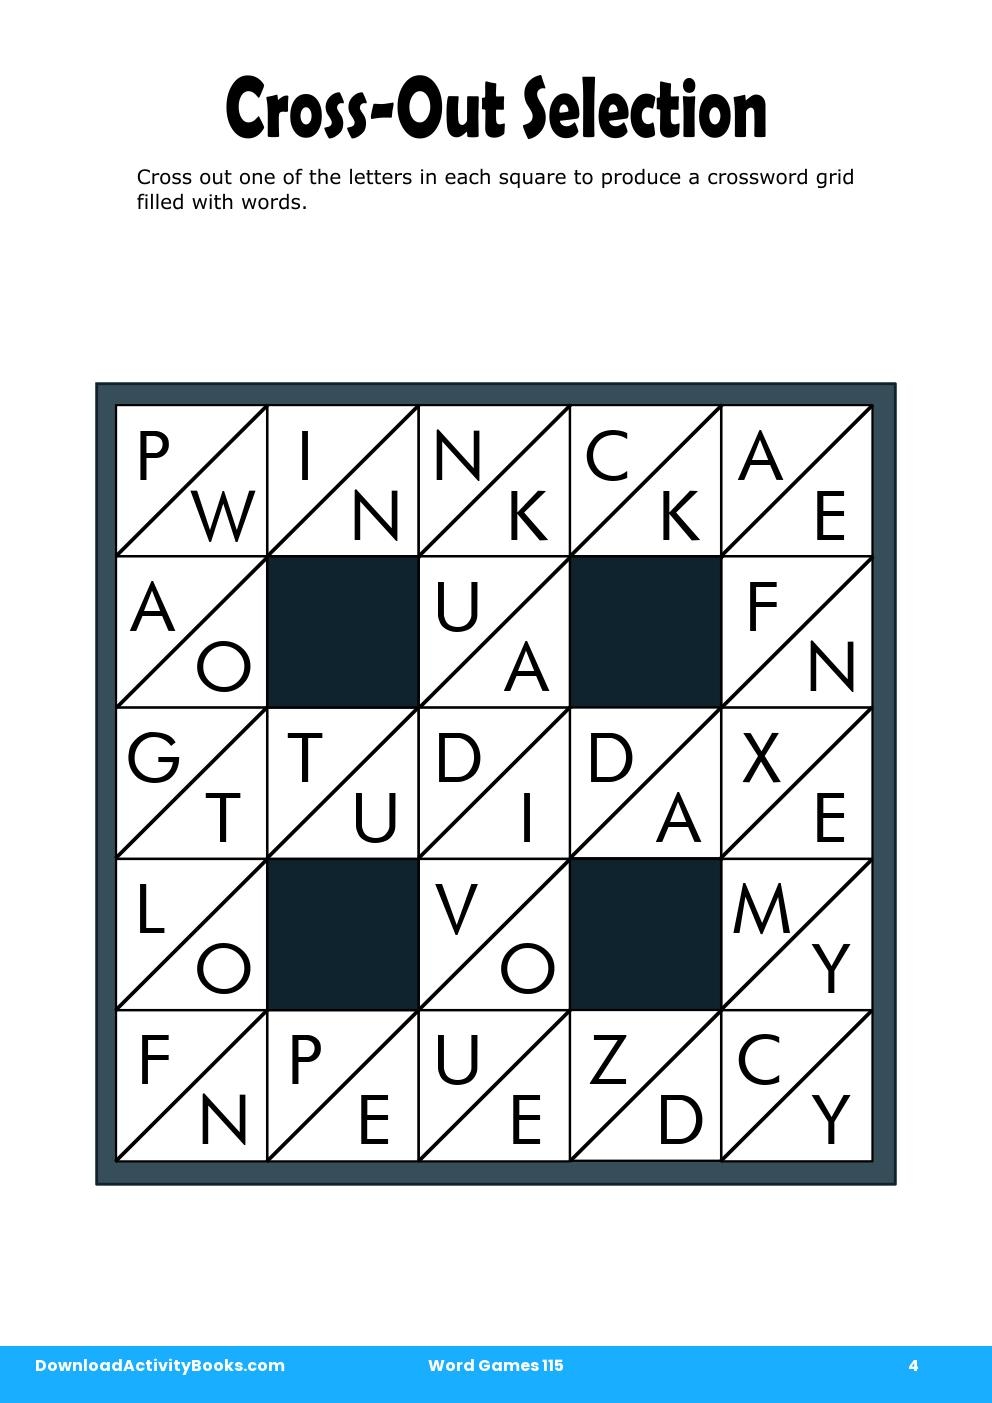 Cross-Out Selection in Word Games 115